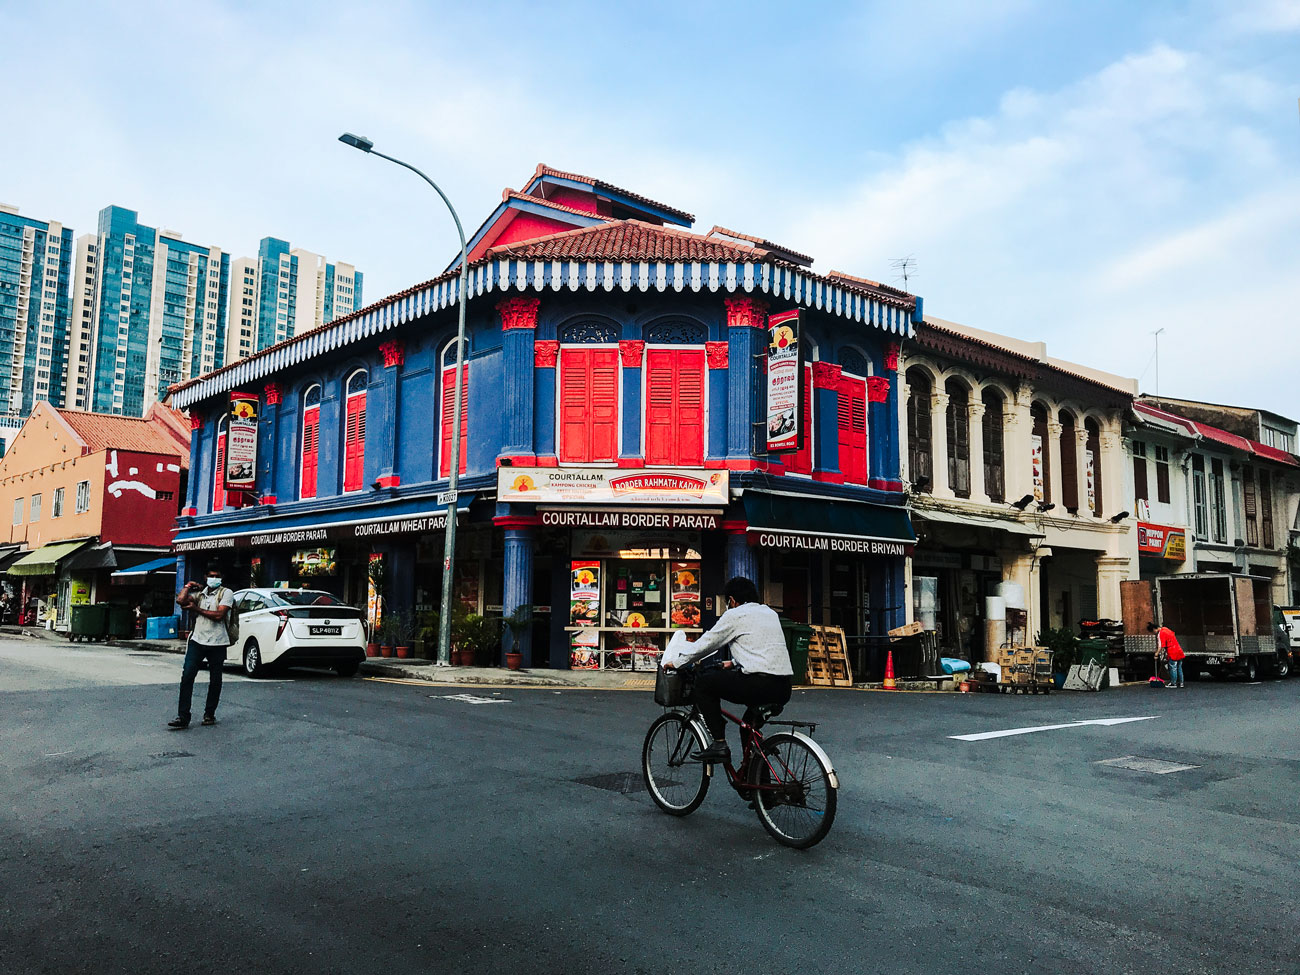 The storefronts of Little India.